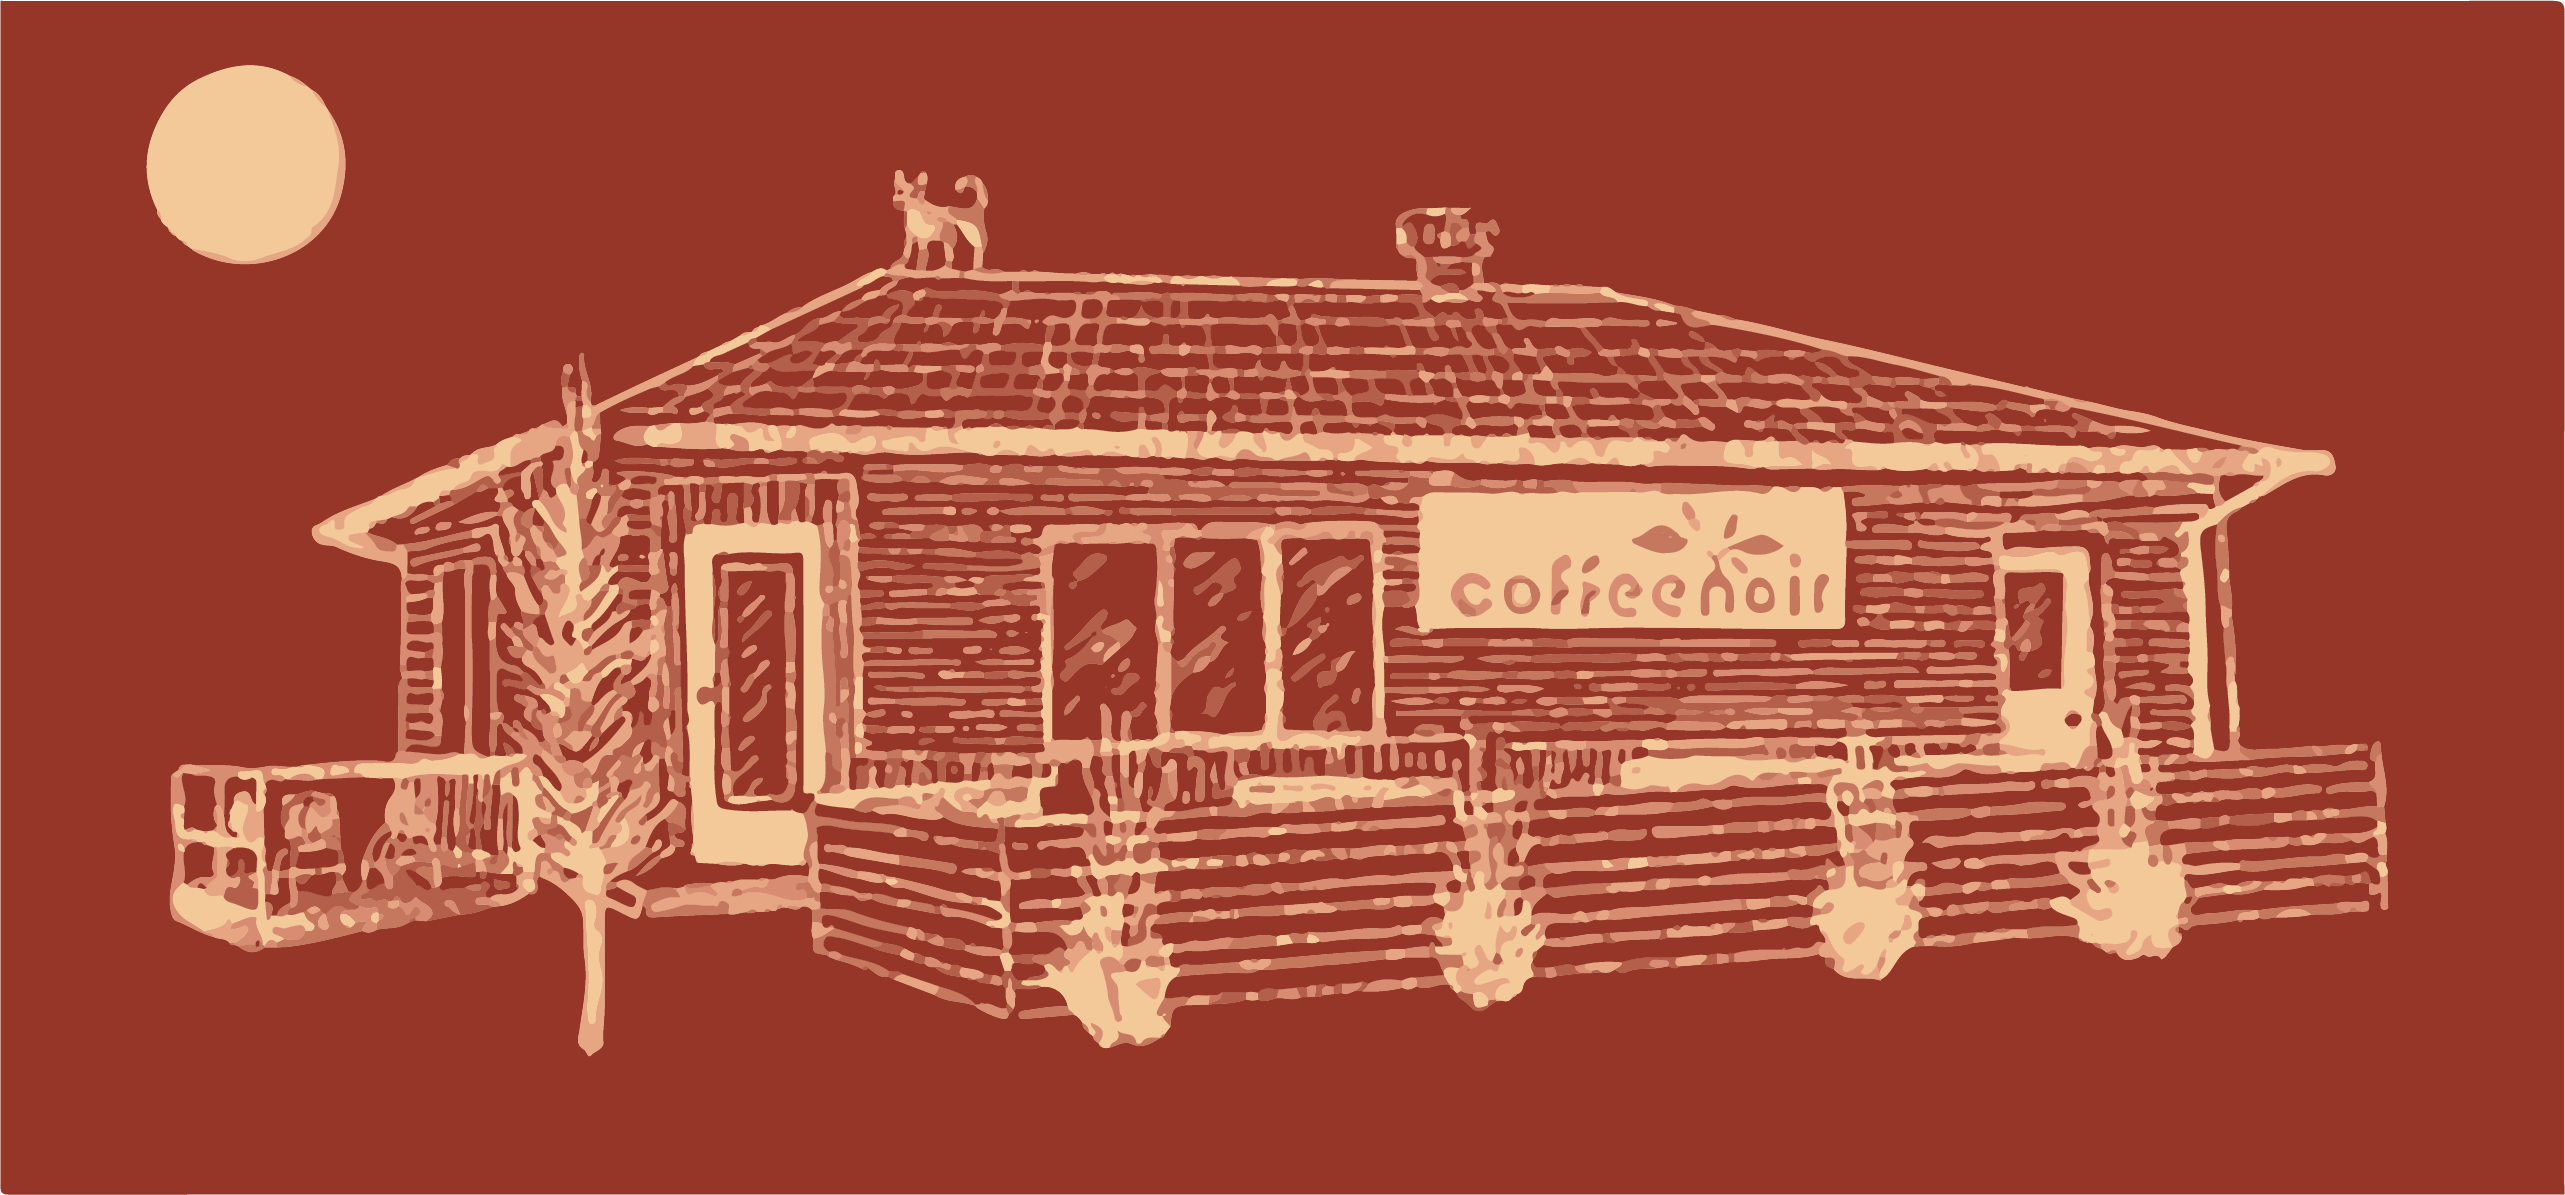 small coffee shop line drawing with a patio a moon and a dog on the roof